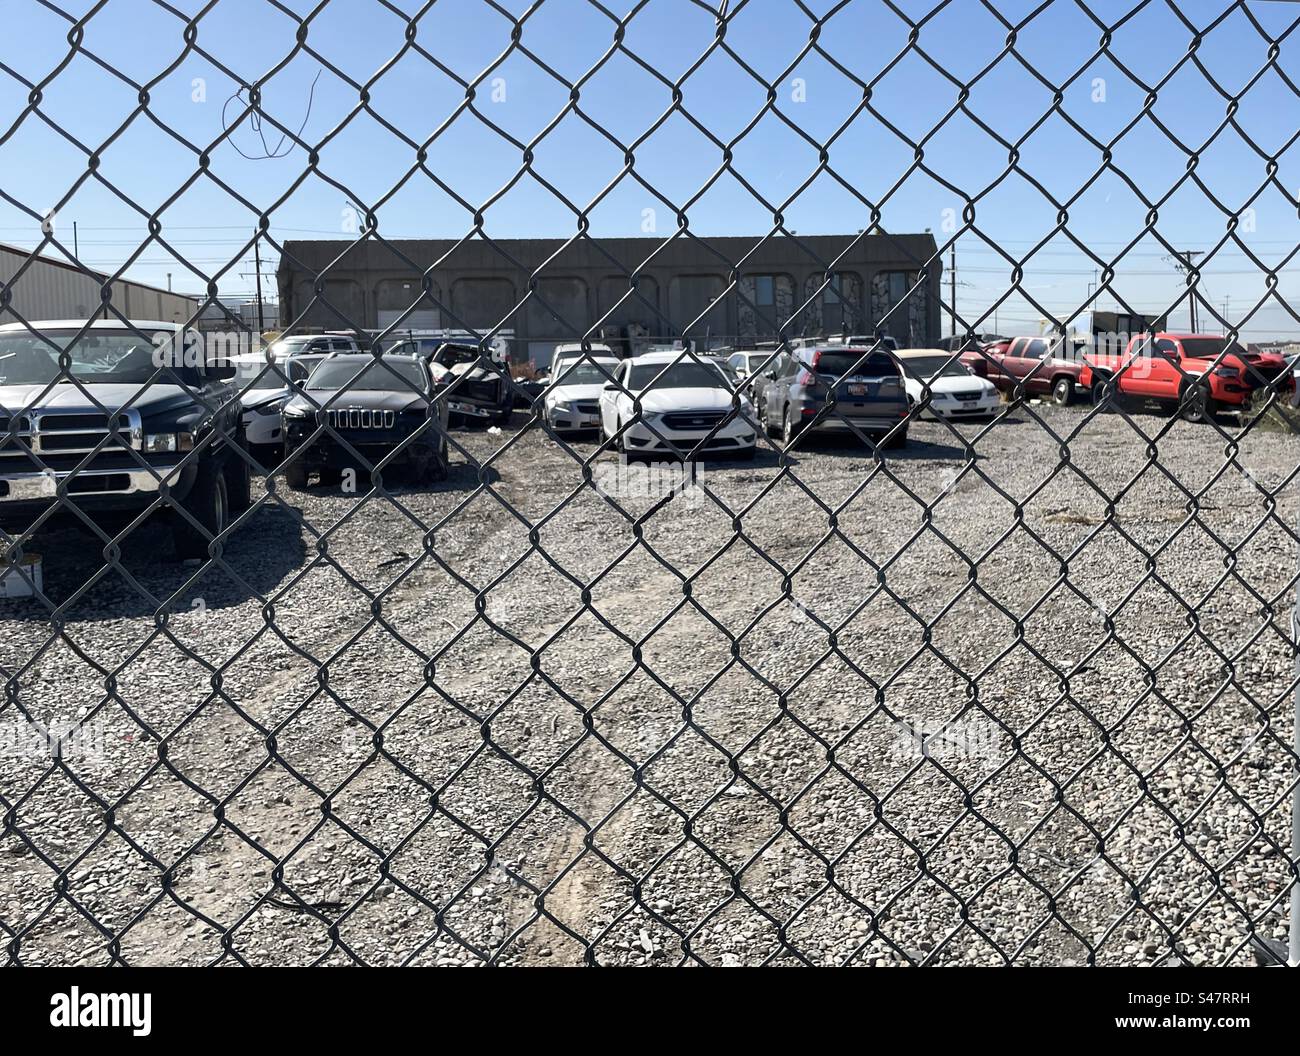 Tow yard, with a surrounding barbed wire chain link fence, to keep cars safe that have been wrecked and damaged. Stock Photo